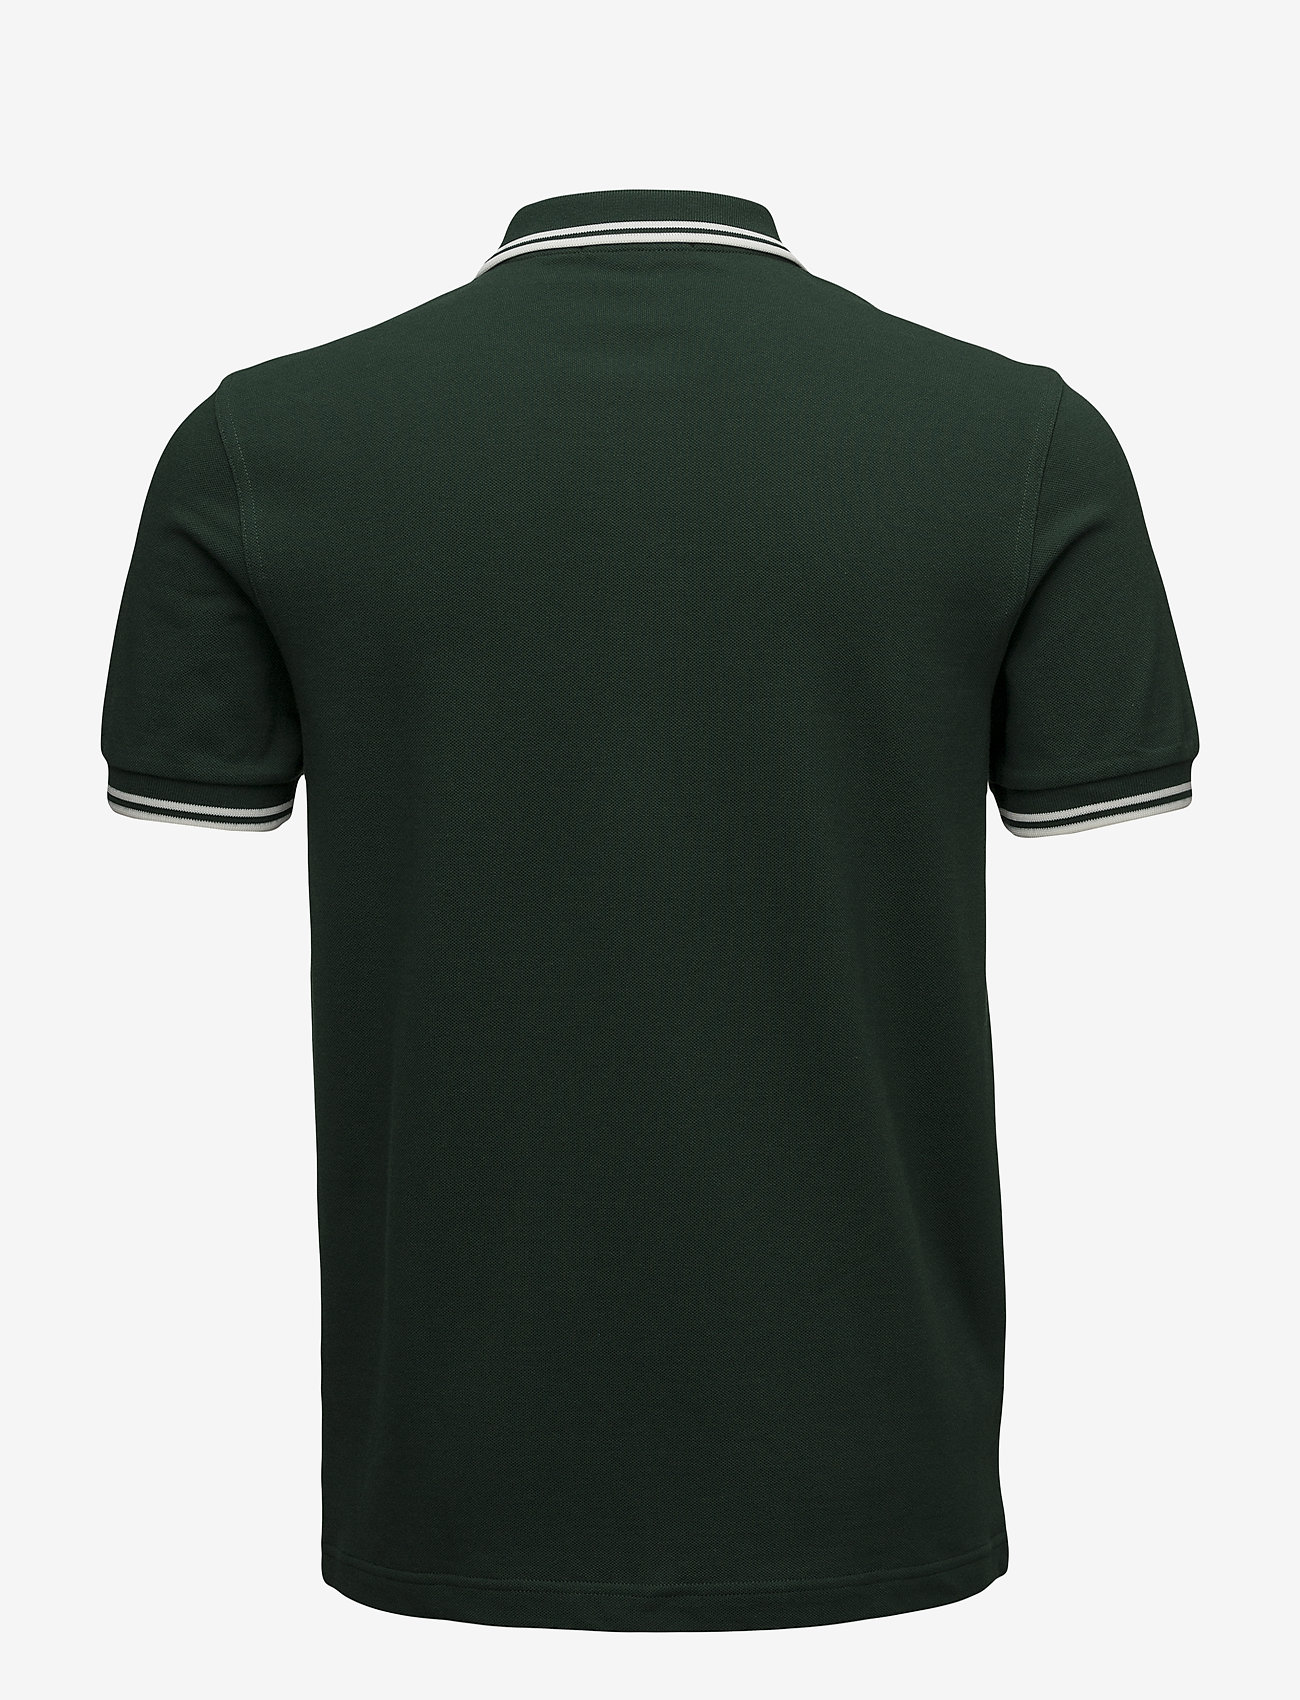 Fred Perry - TWIN TIPPED FP SHIRT - short-sleeved polos - ivy - 1